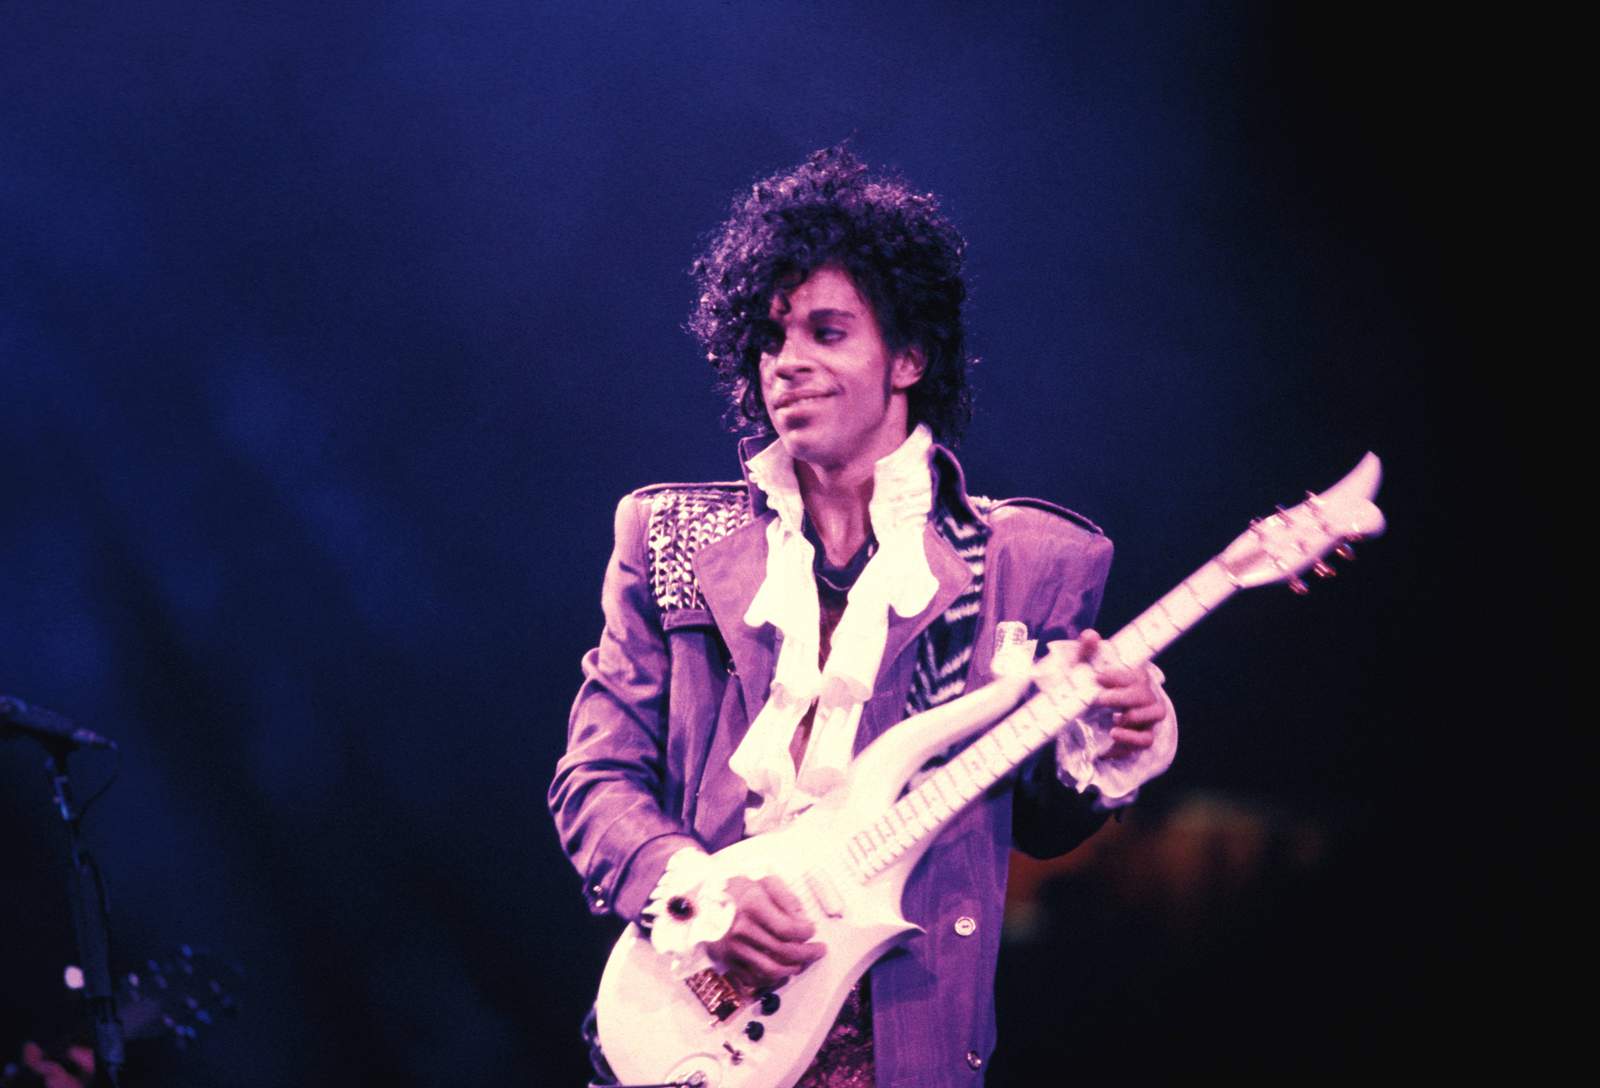 Prince and the Revolution concert from 1985 to stream on YouTube all weekend